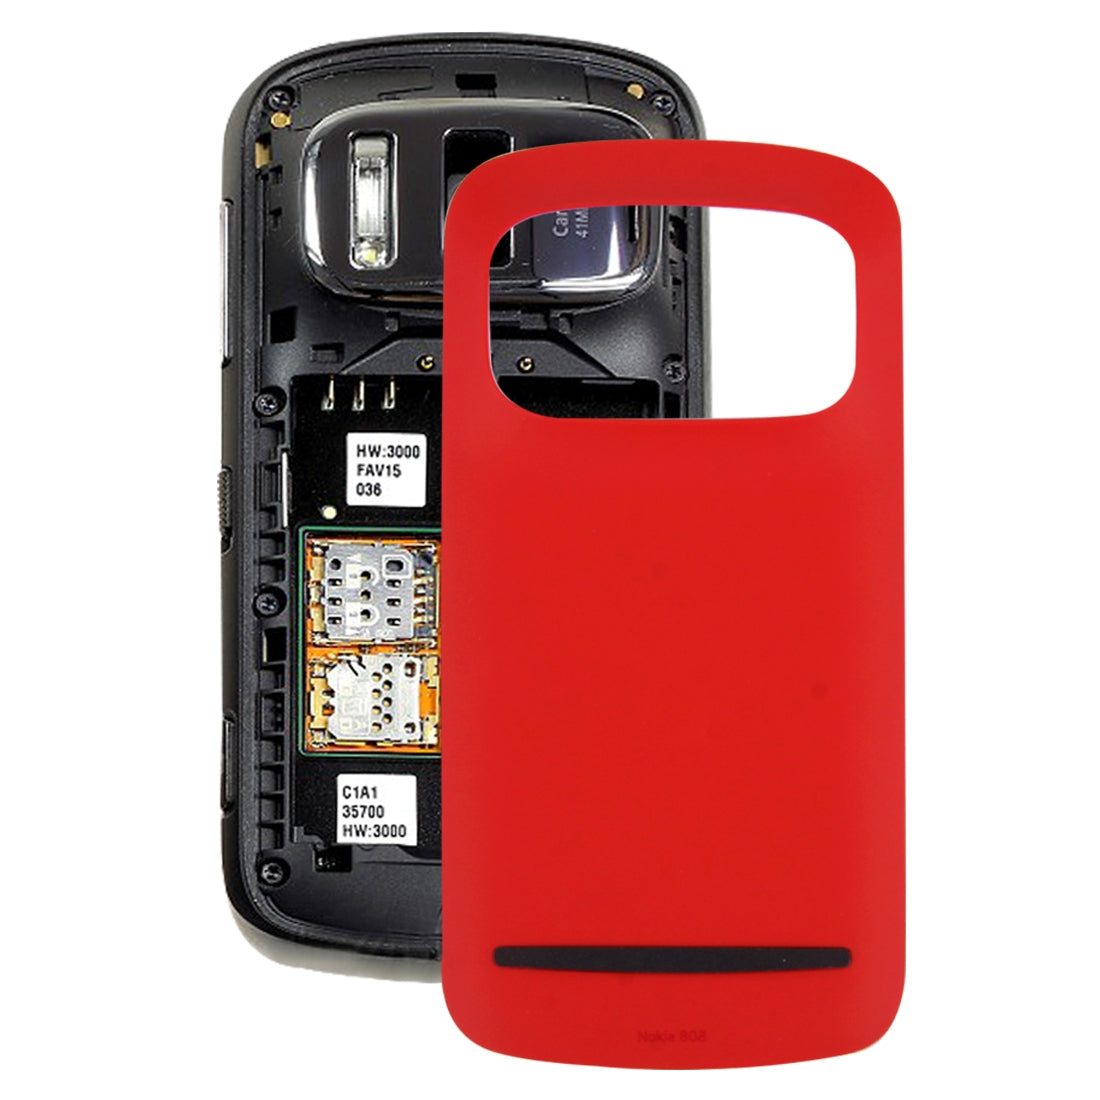 Battery Cover Back Cover Nokia 808 Red